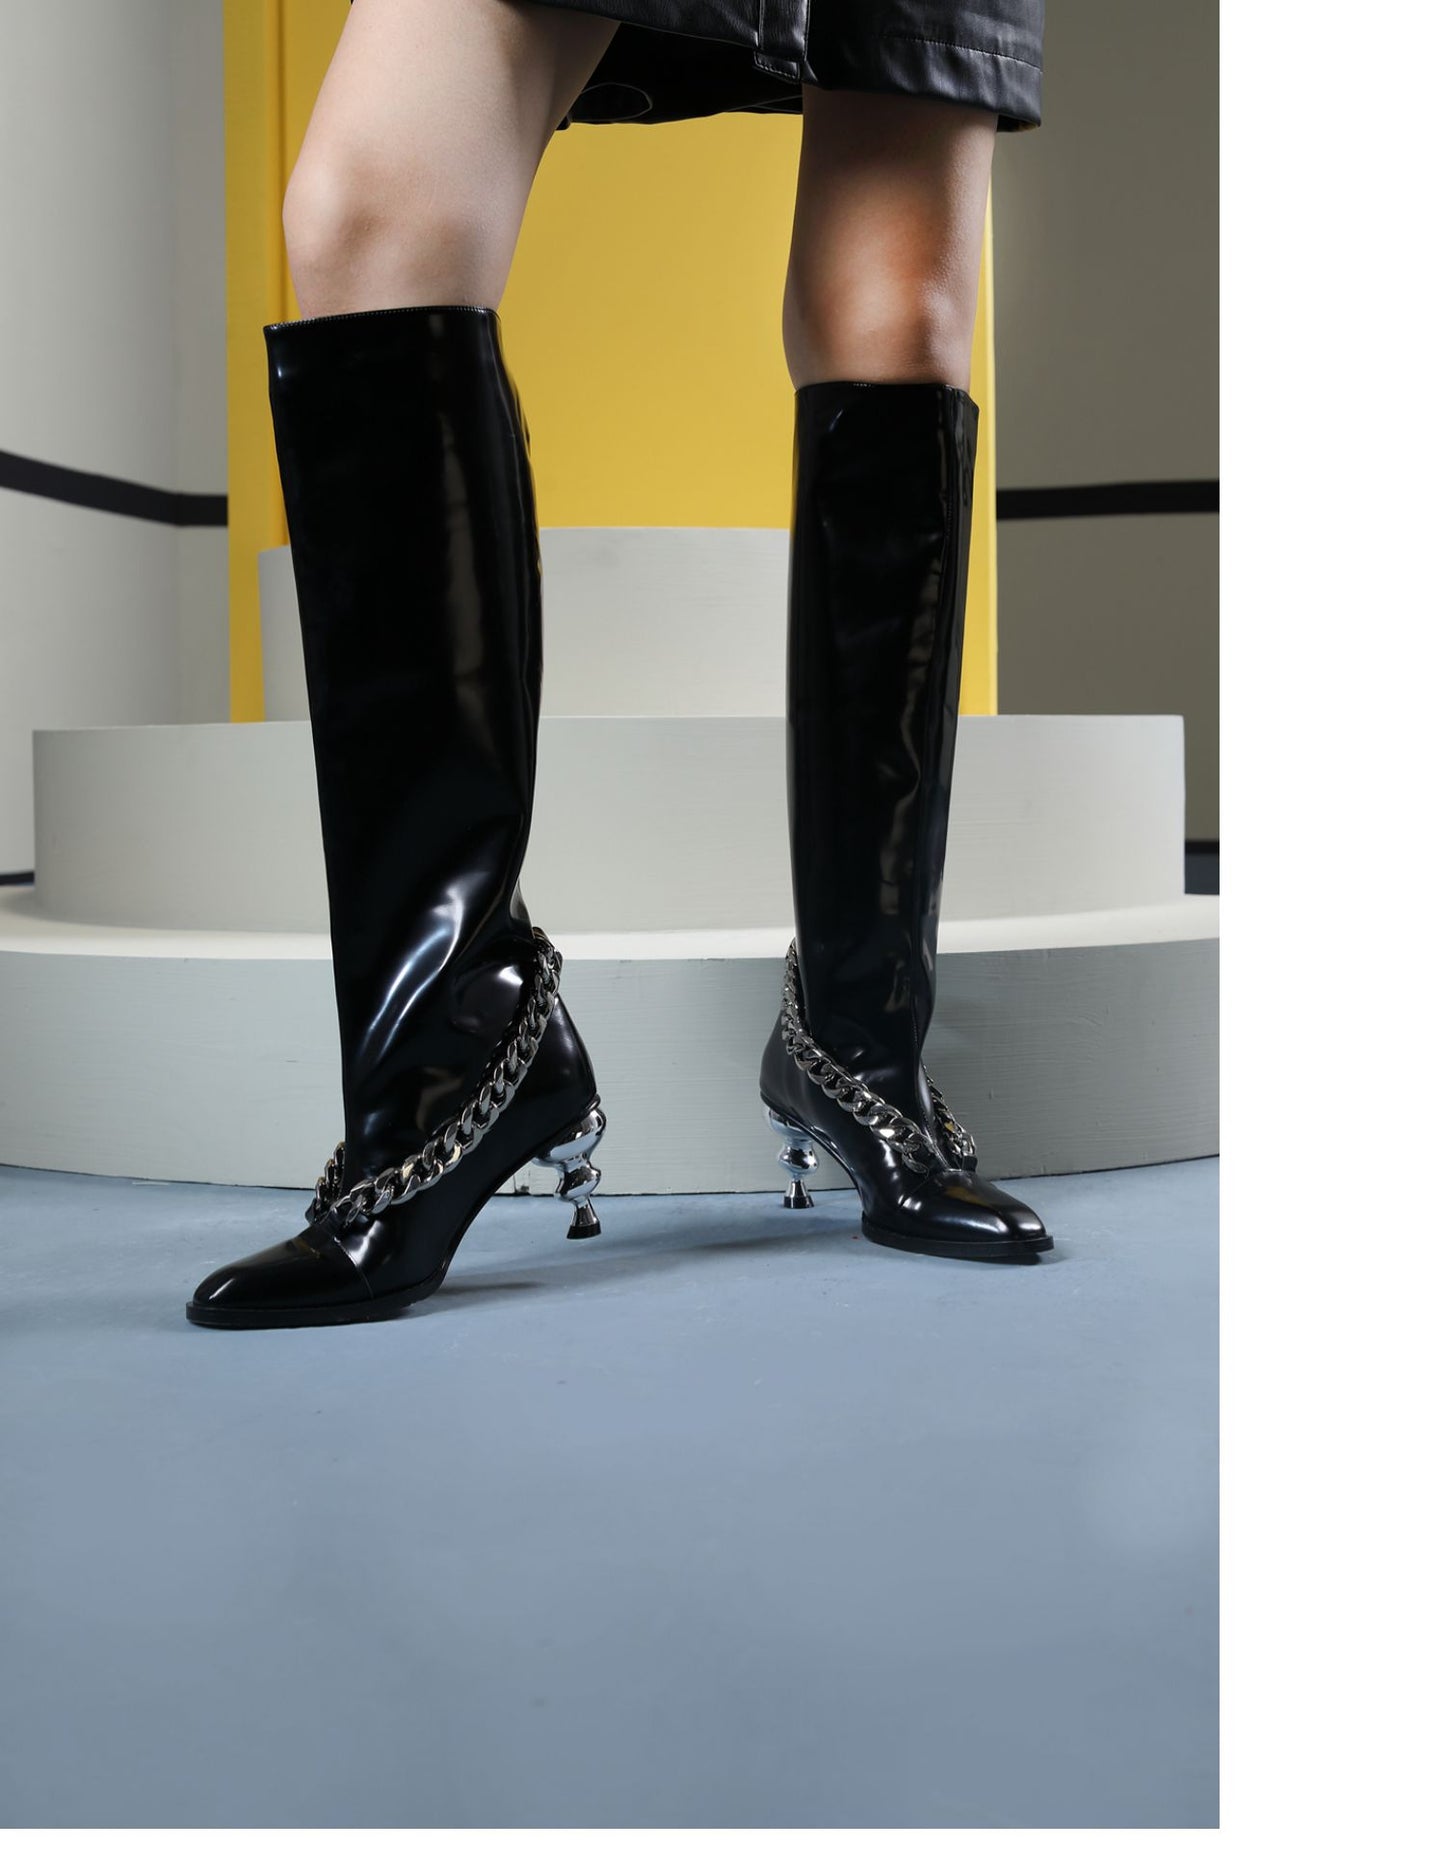 B-FEI unique patent knee high boots autumn and winter- Tolia